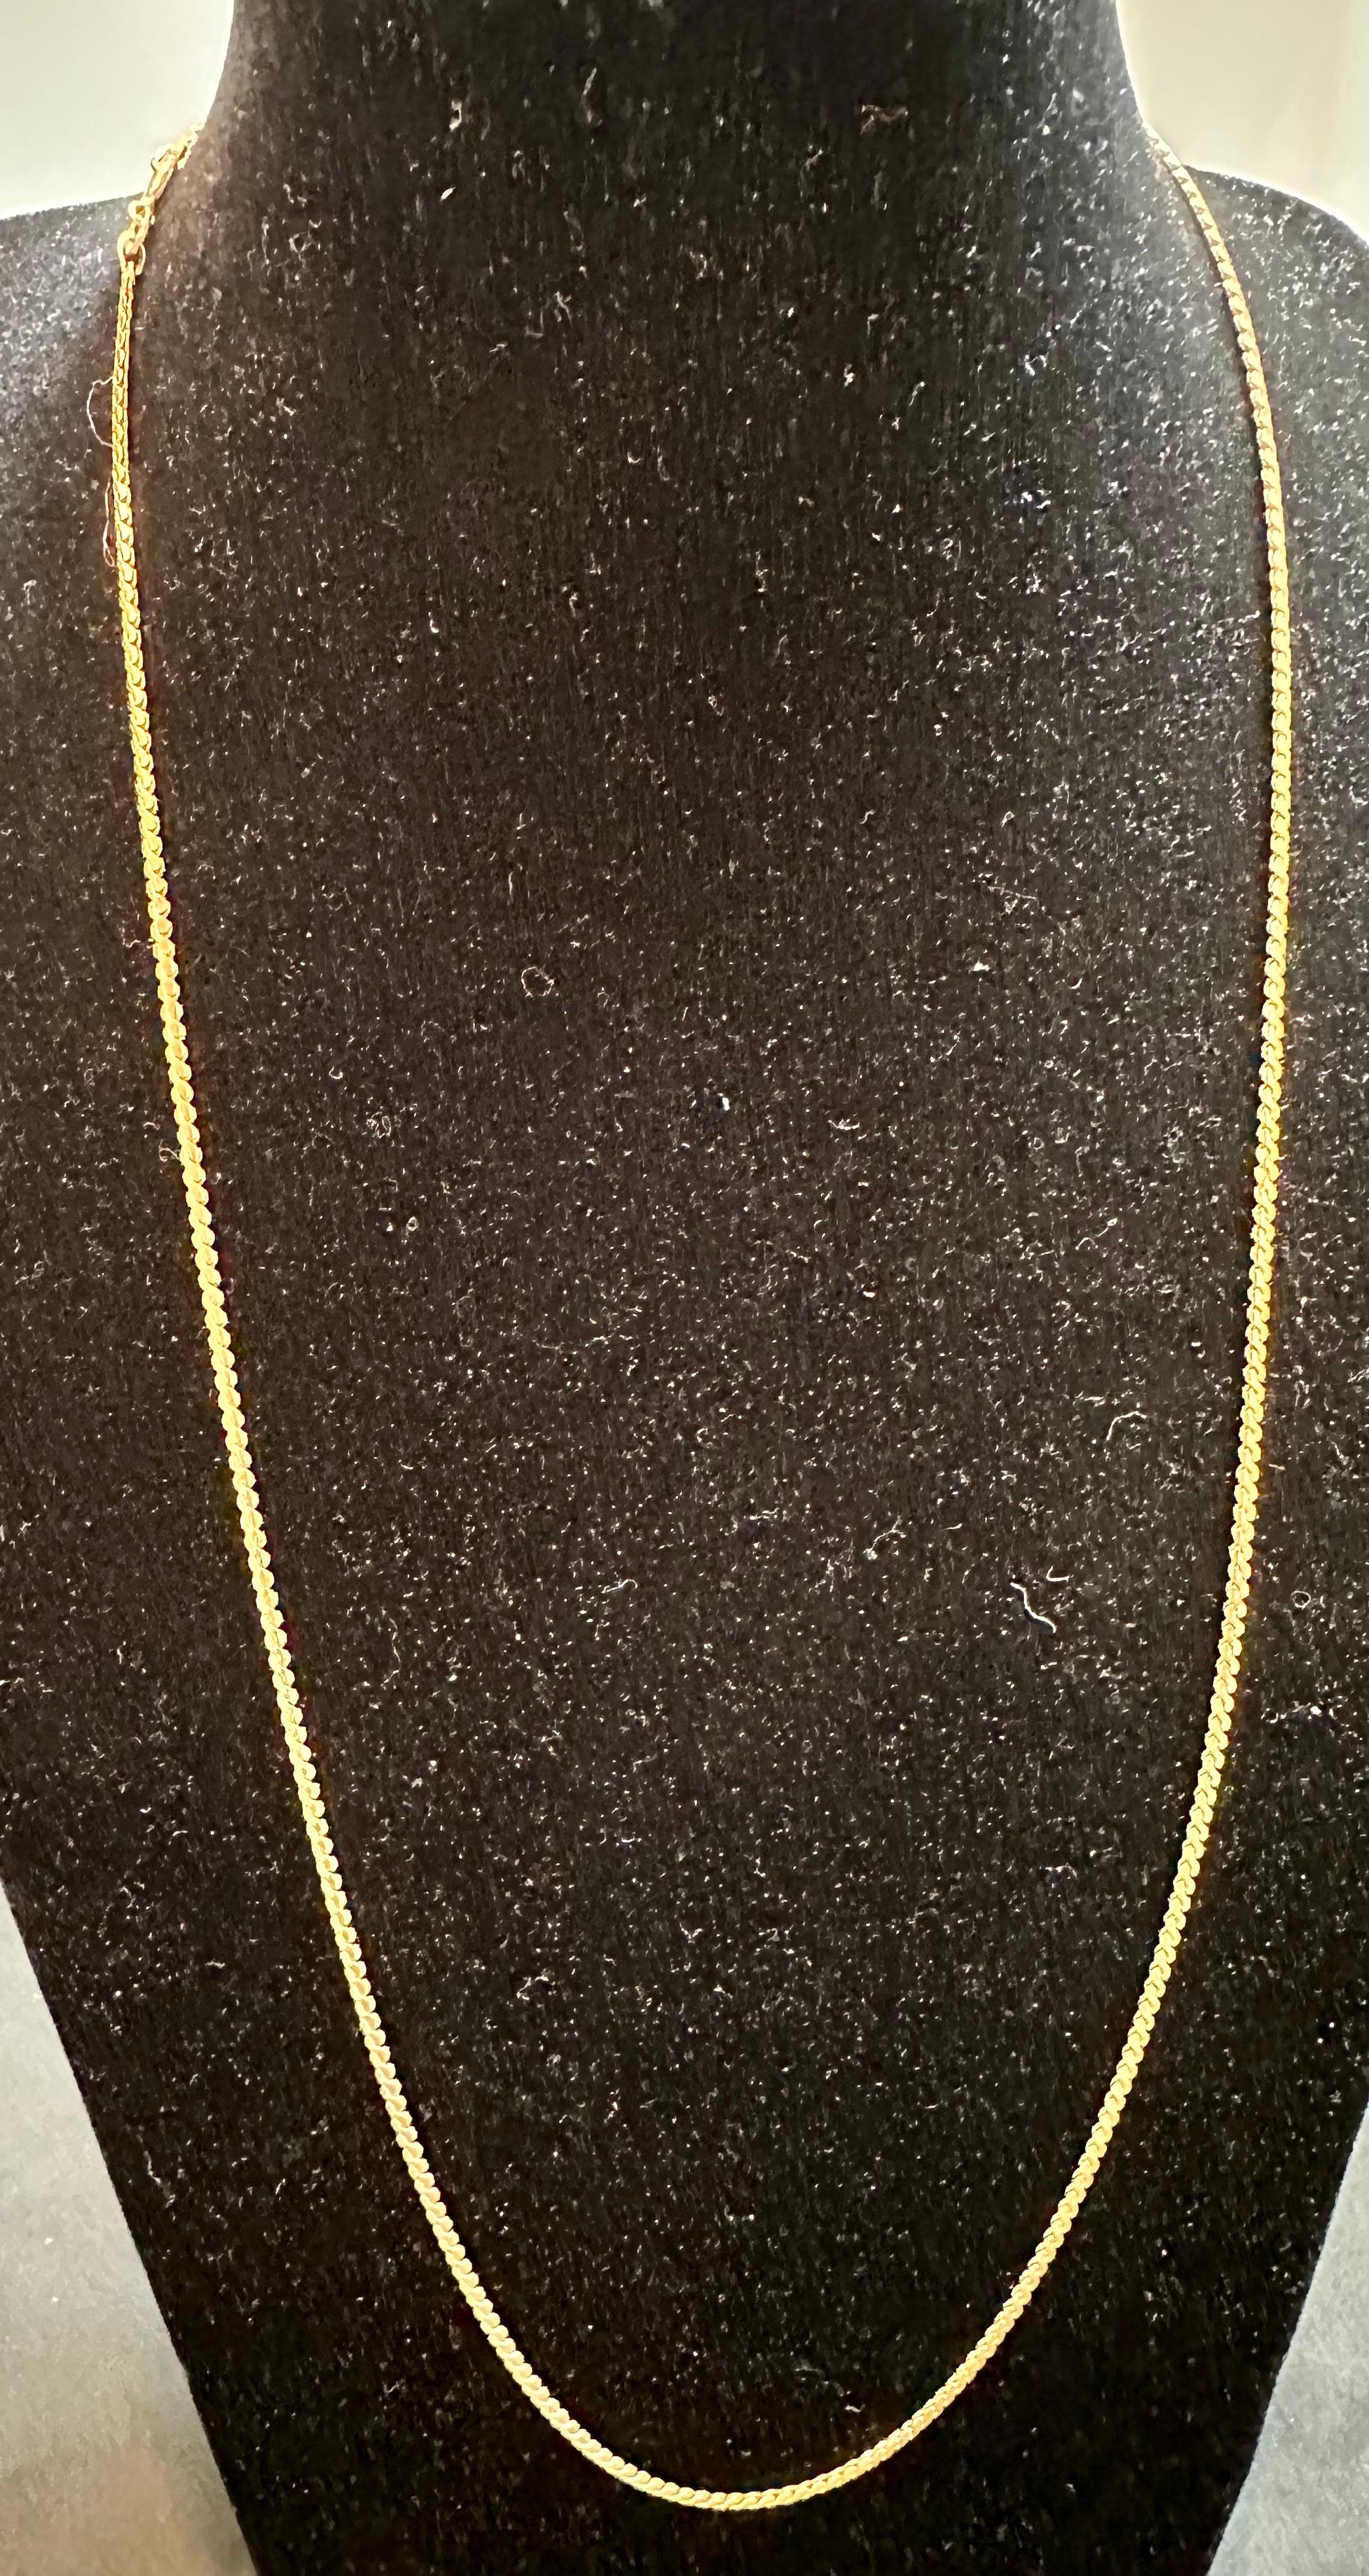 Vintage 18 Karat Yellow Gold 9.6 Gm S Link Chain Necklace For Sale 6